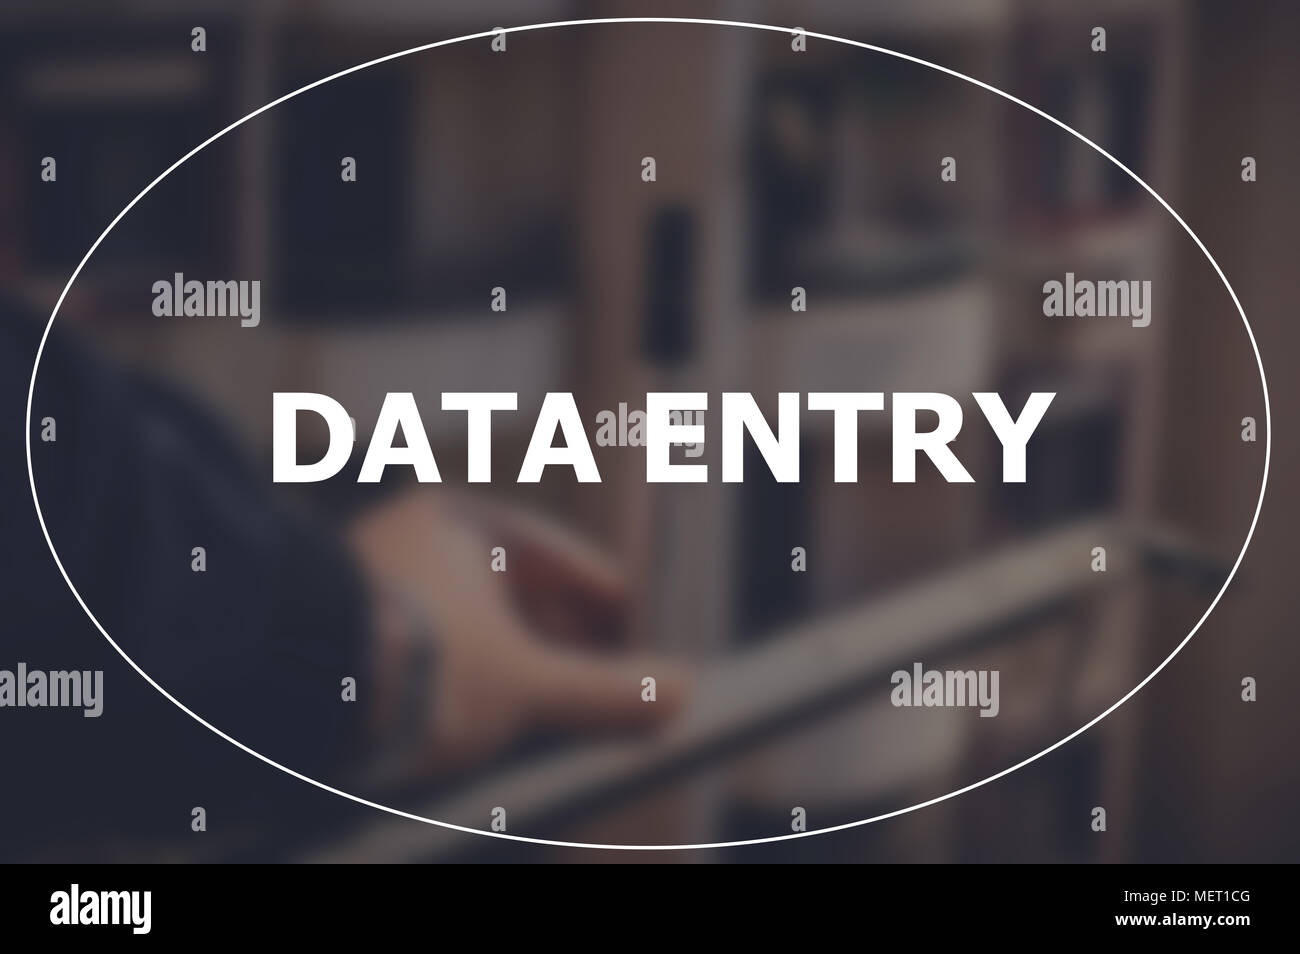 Data entry word with blurring business background Stock Photo